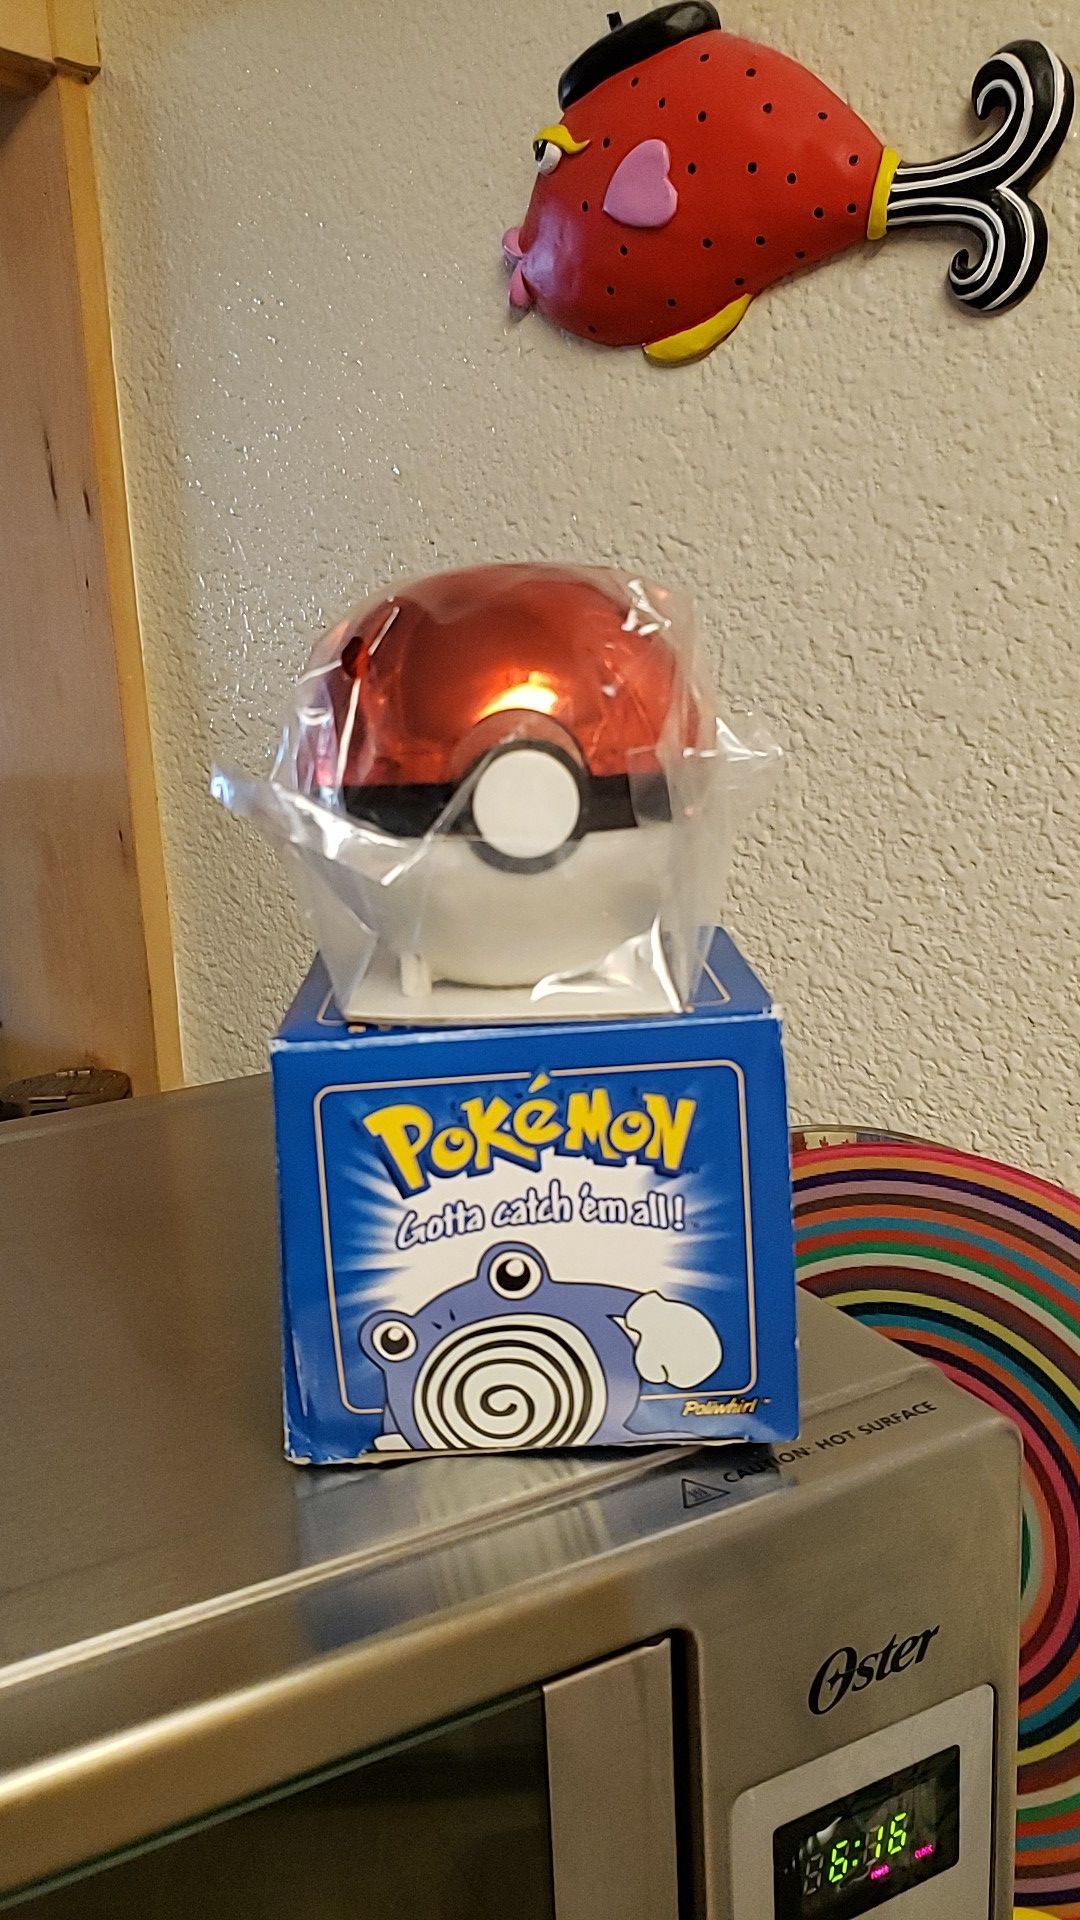 Pokemon Poliwhirl inbox to protect authenticity